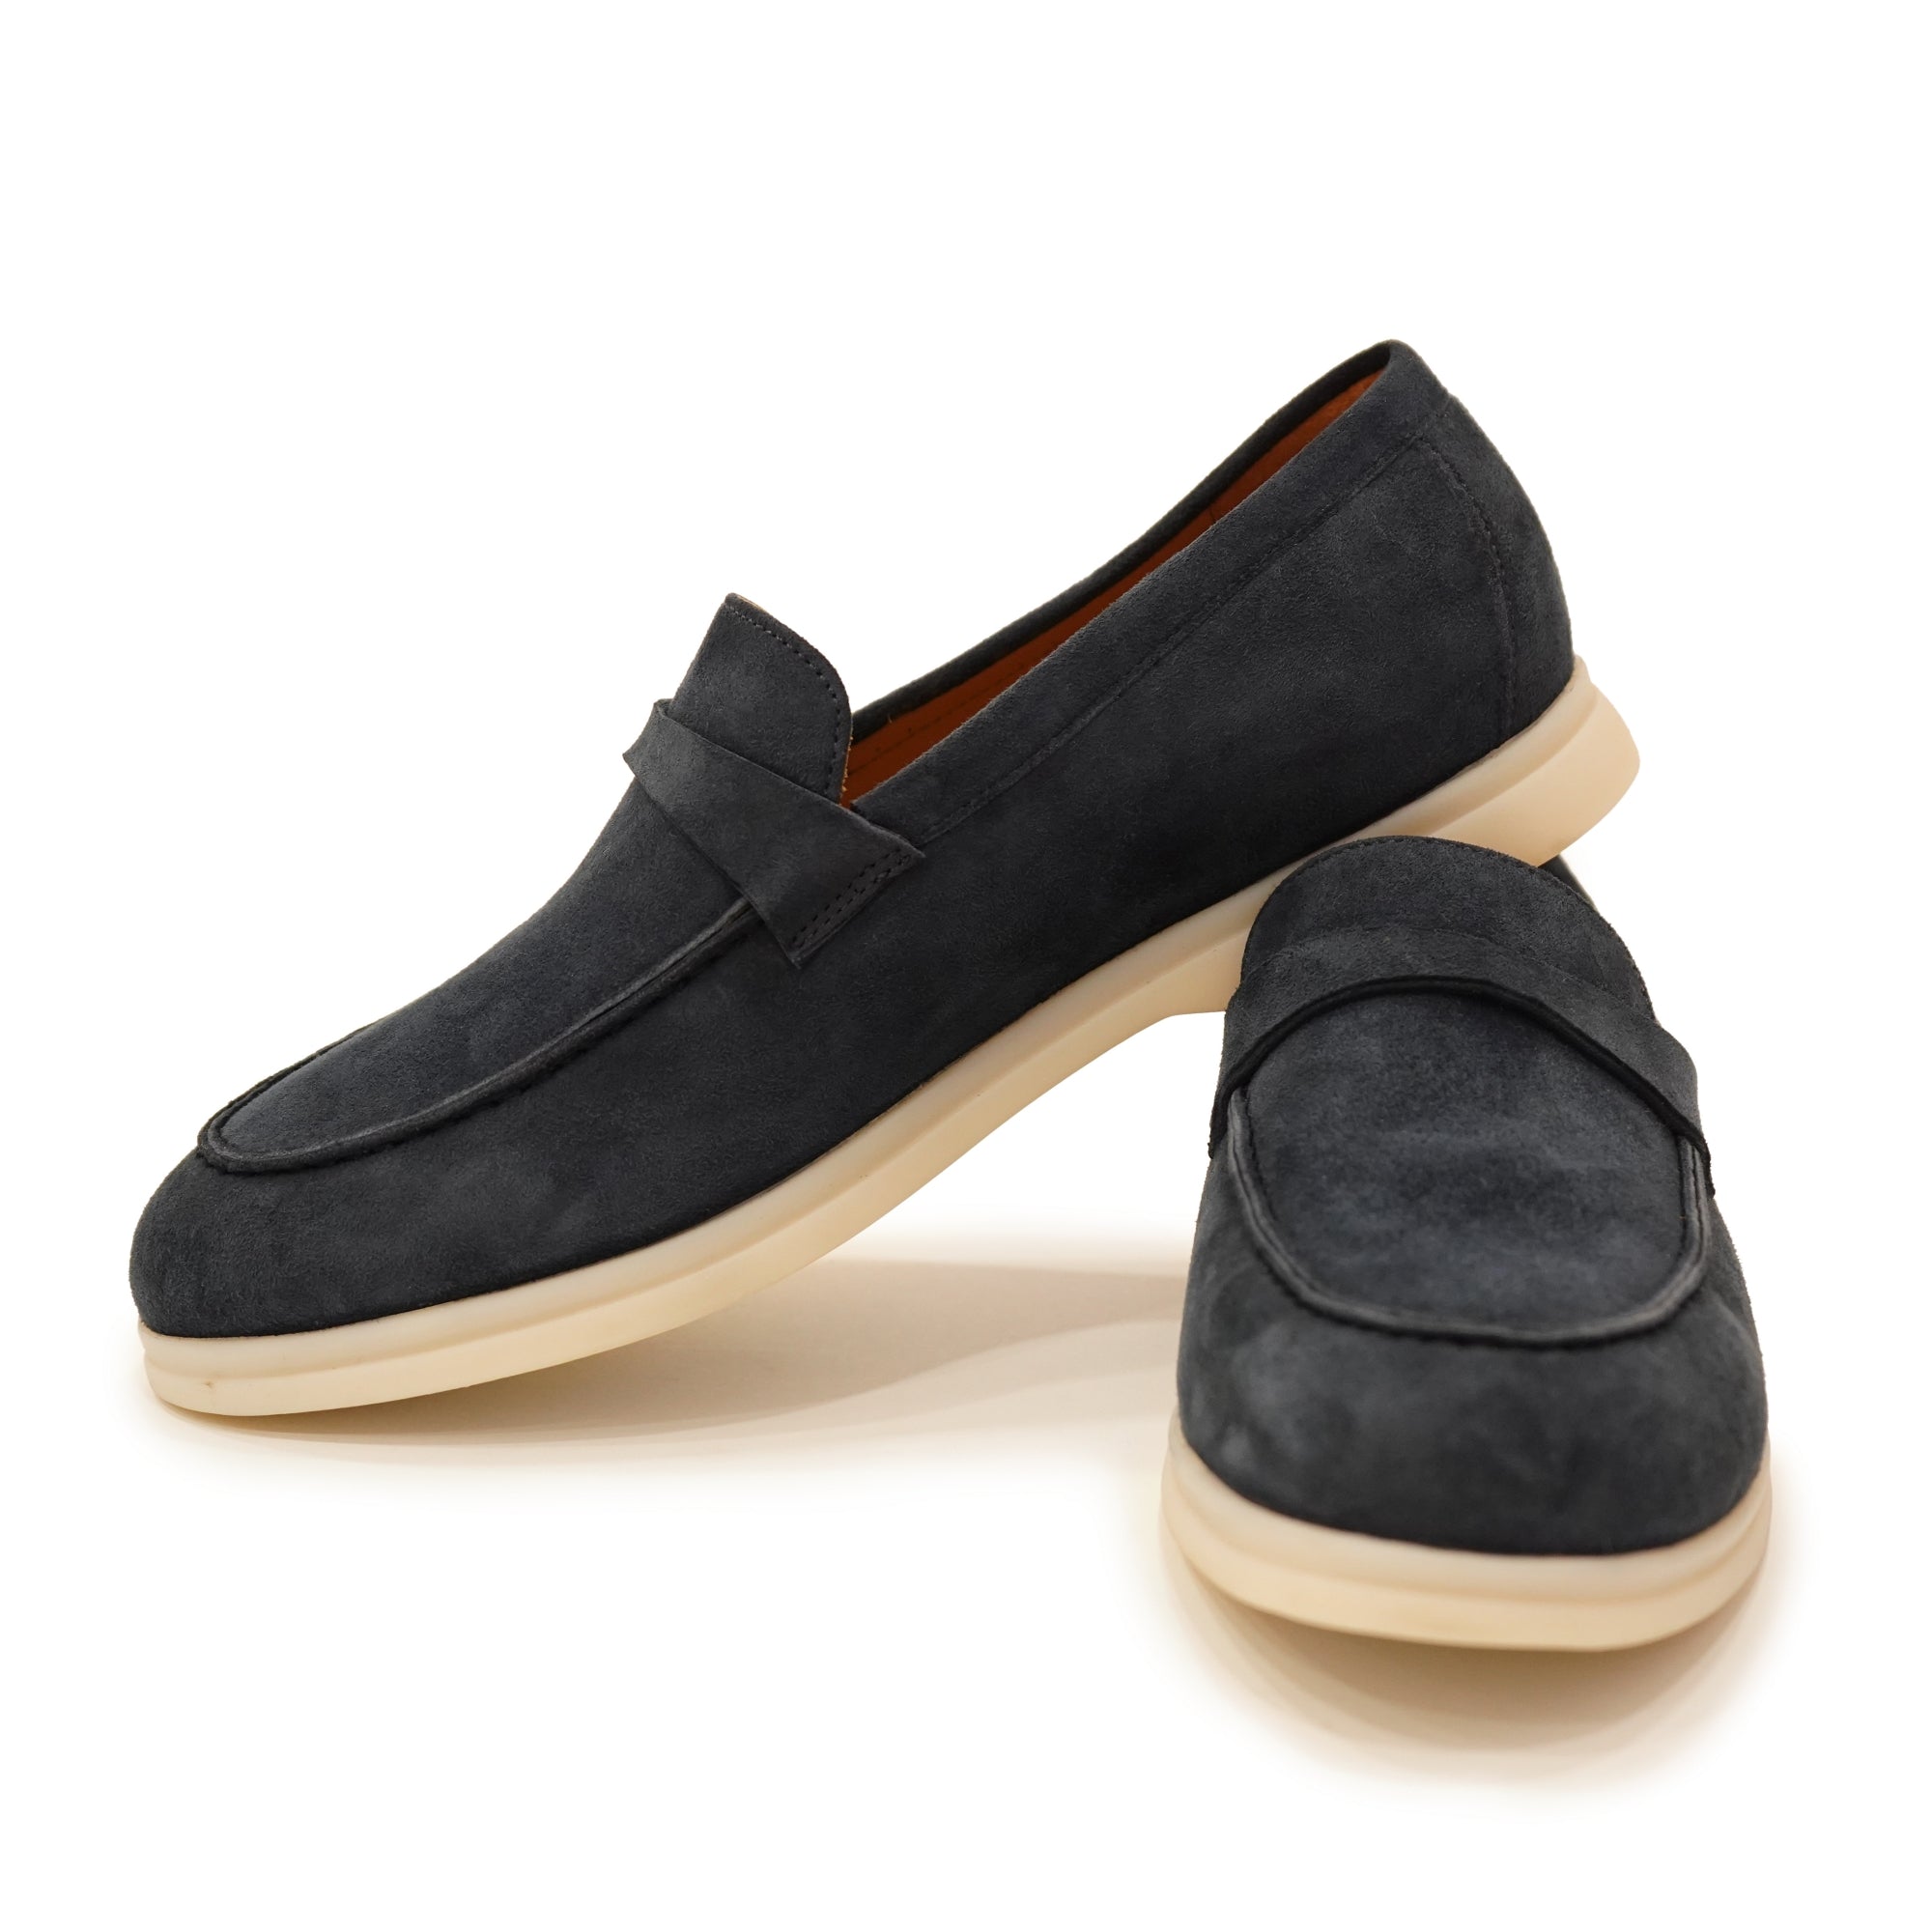 Midnight Glide Suede Loafers